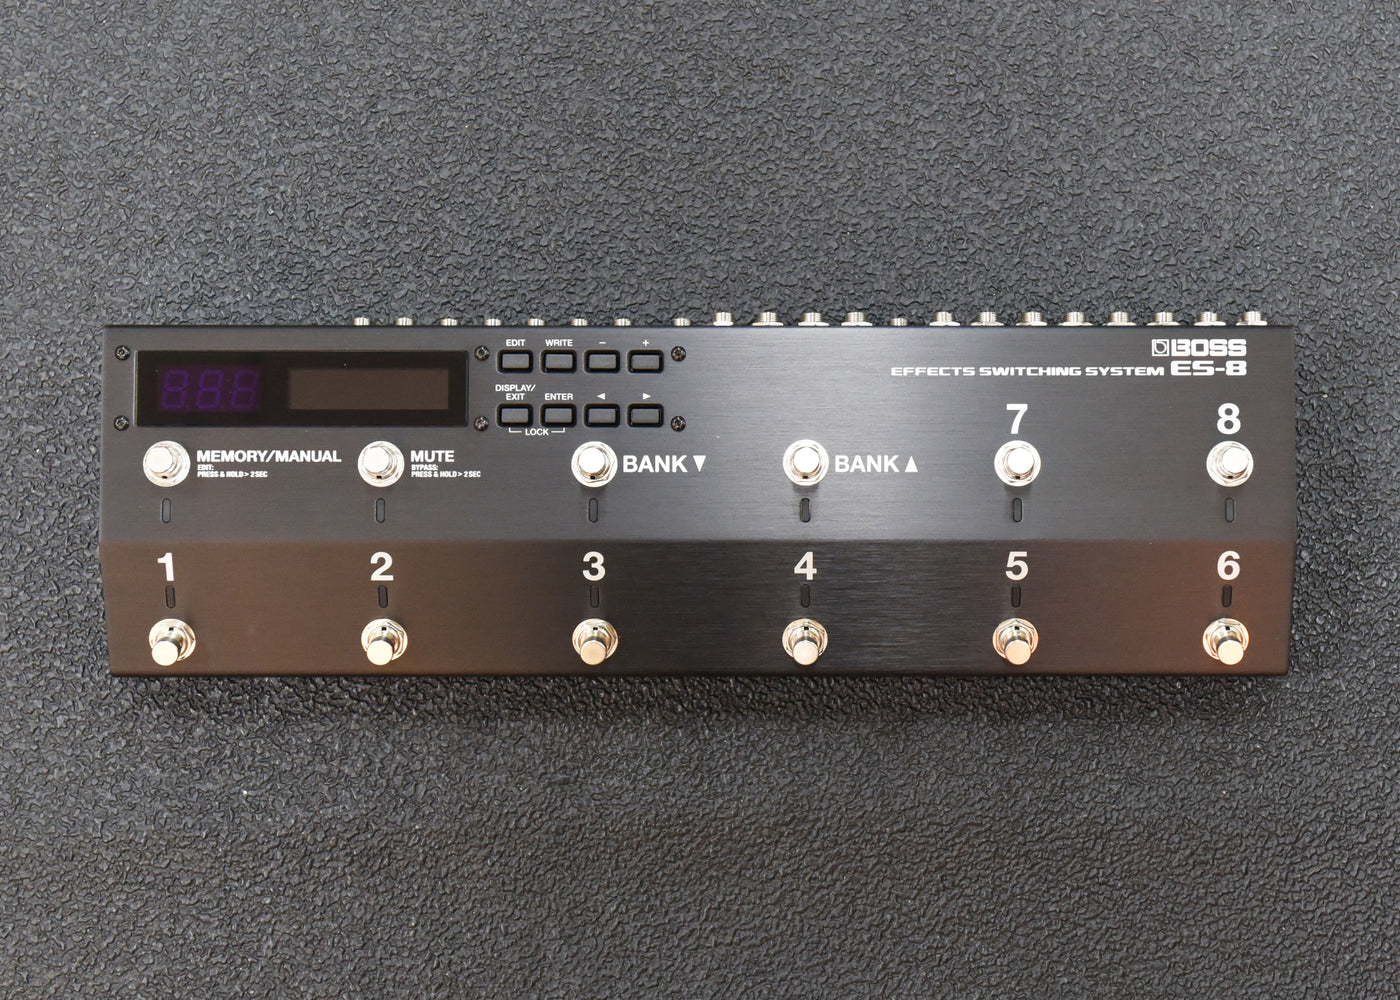 ES-8 Switching System